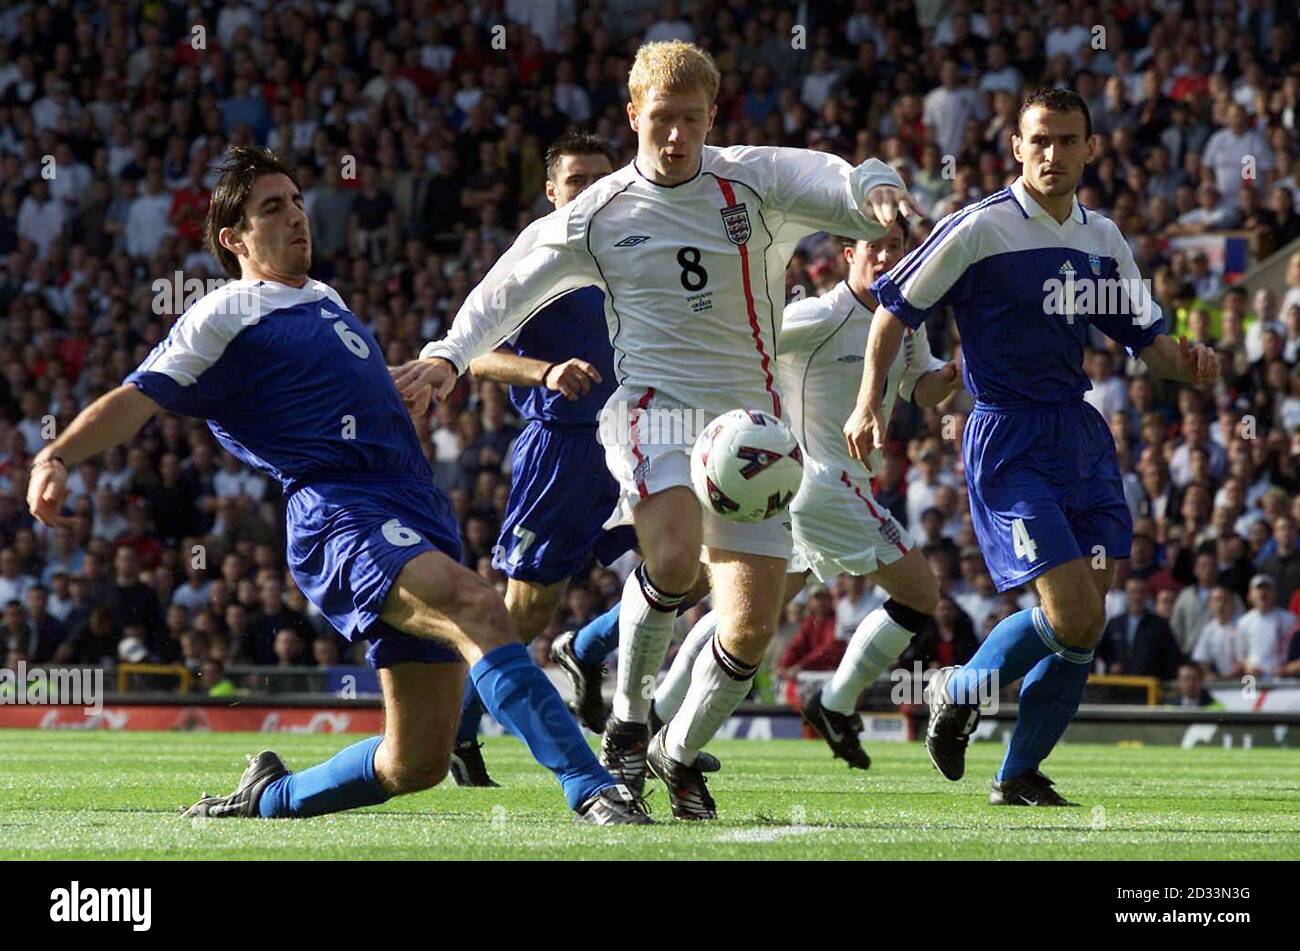 England's Paul Scholes (centre) cuts through the Greek defence during the FIFA World Cup European Qualifying Group Nine match at Old Trafford, Manchester.   eg Stock Photo